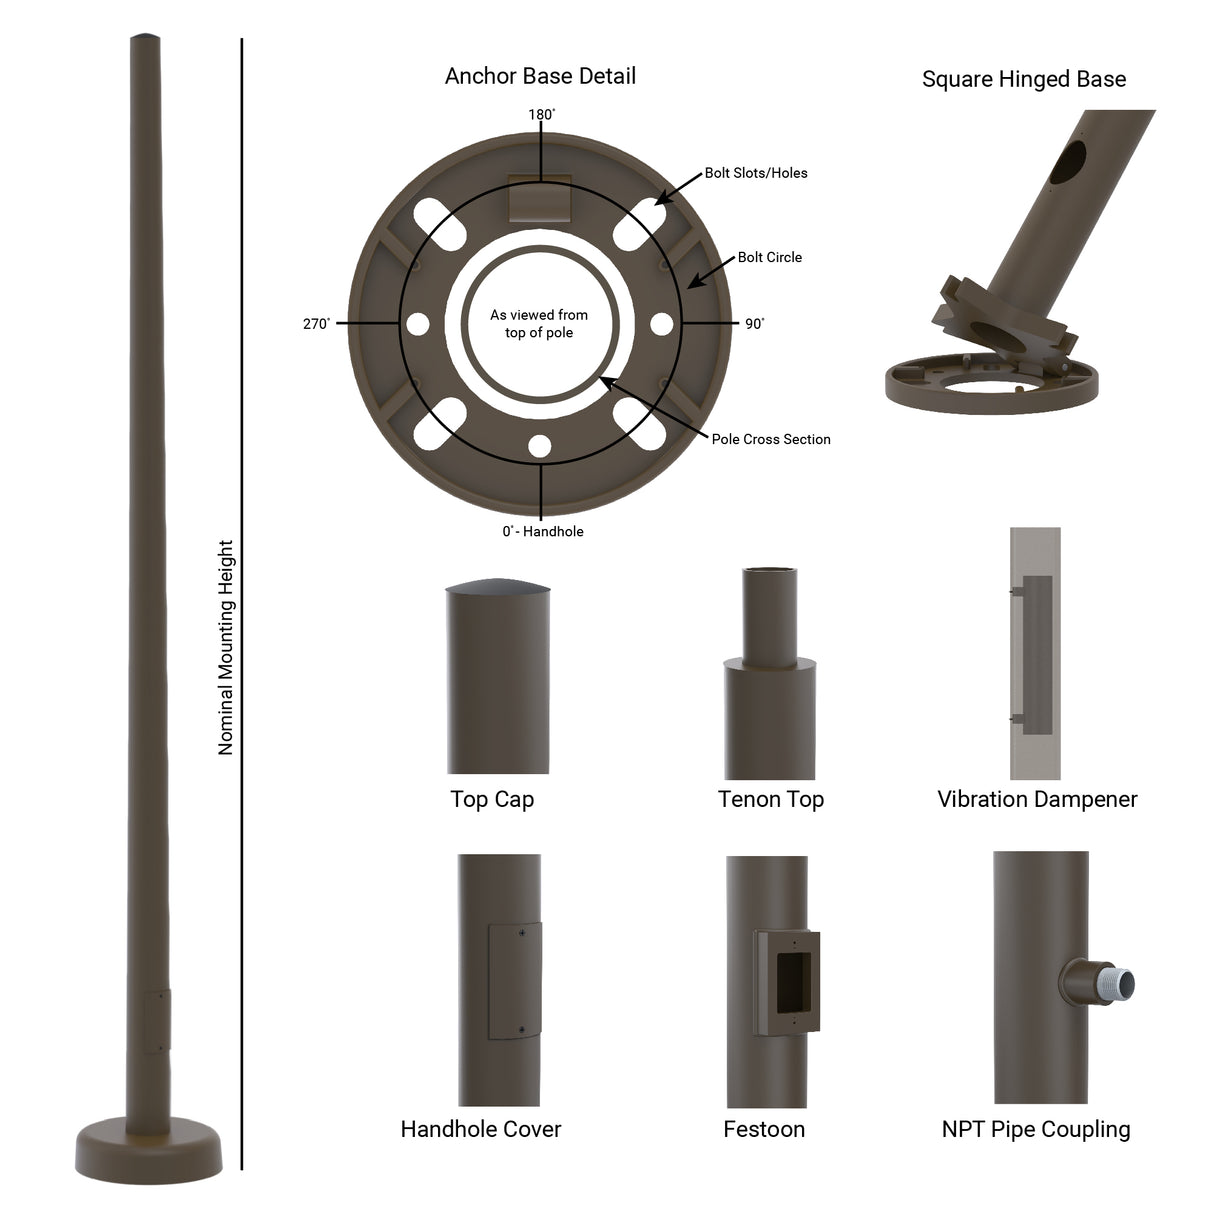 14' Tall x 4.0" Base OD x 3.0" Top OD x 0.125" Thick, Round Tapered Aluminum, Hinged Anchor Base Light Pole